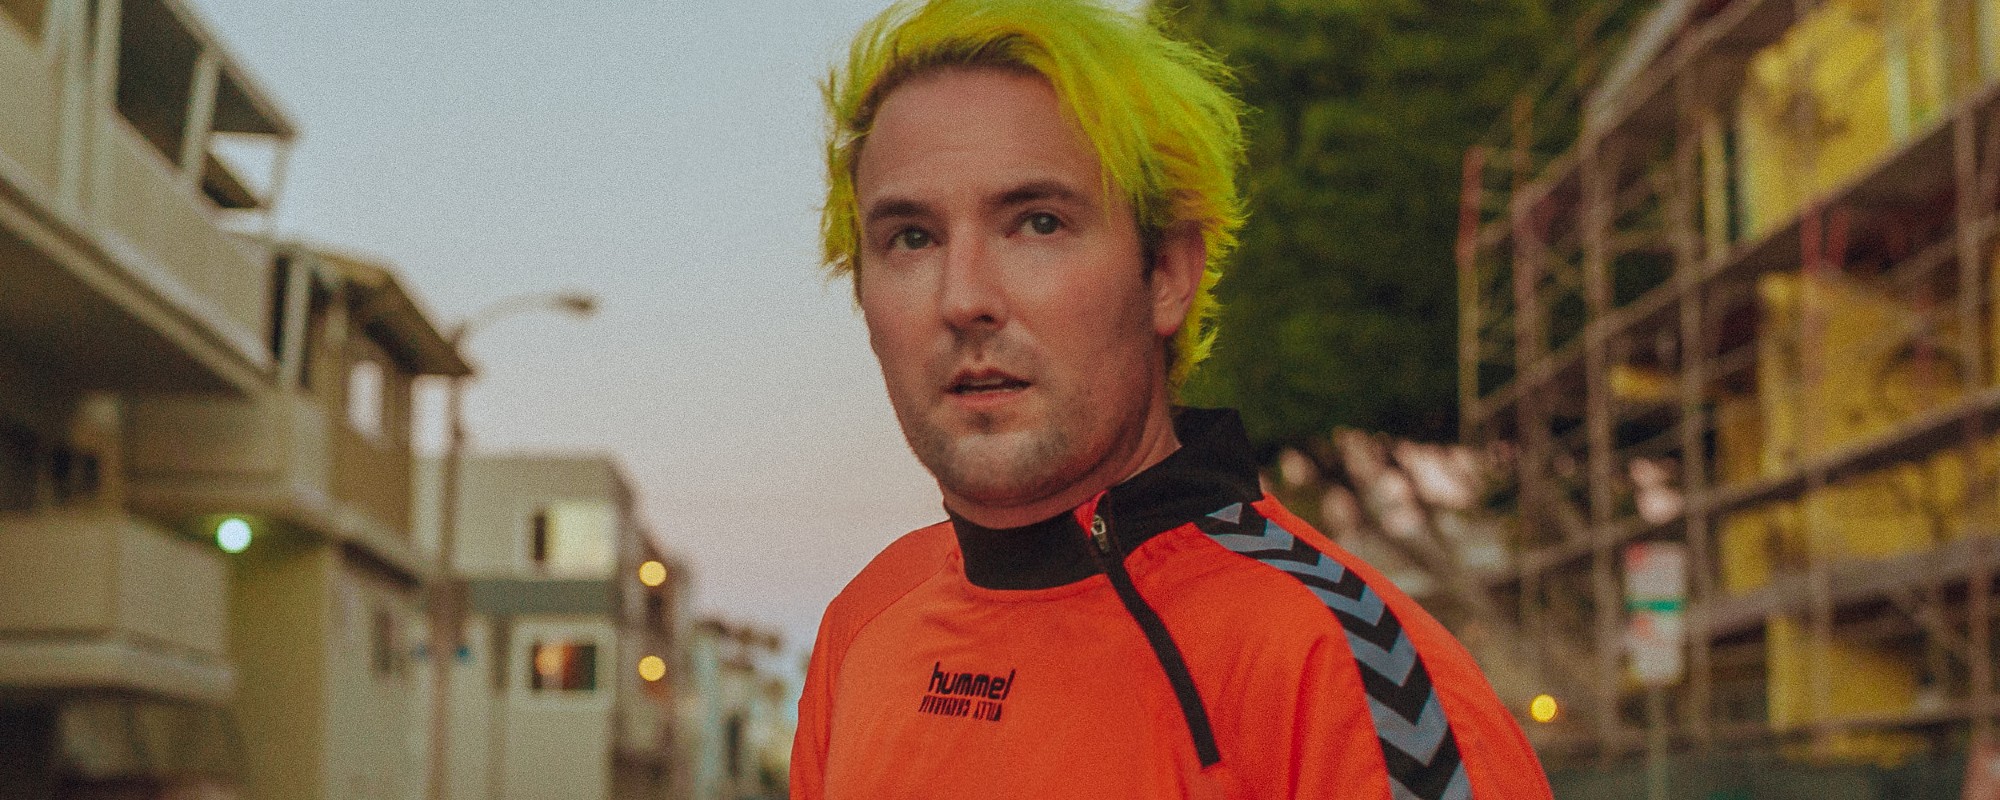 morgxn Teams Up With Sara Bareilles For Marvelous Collaboration, “WONDER”